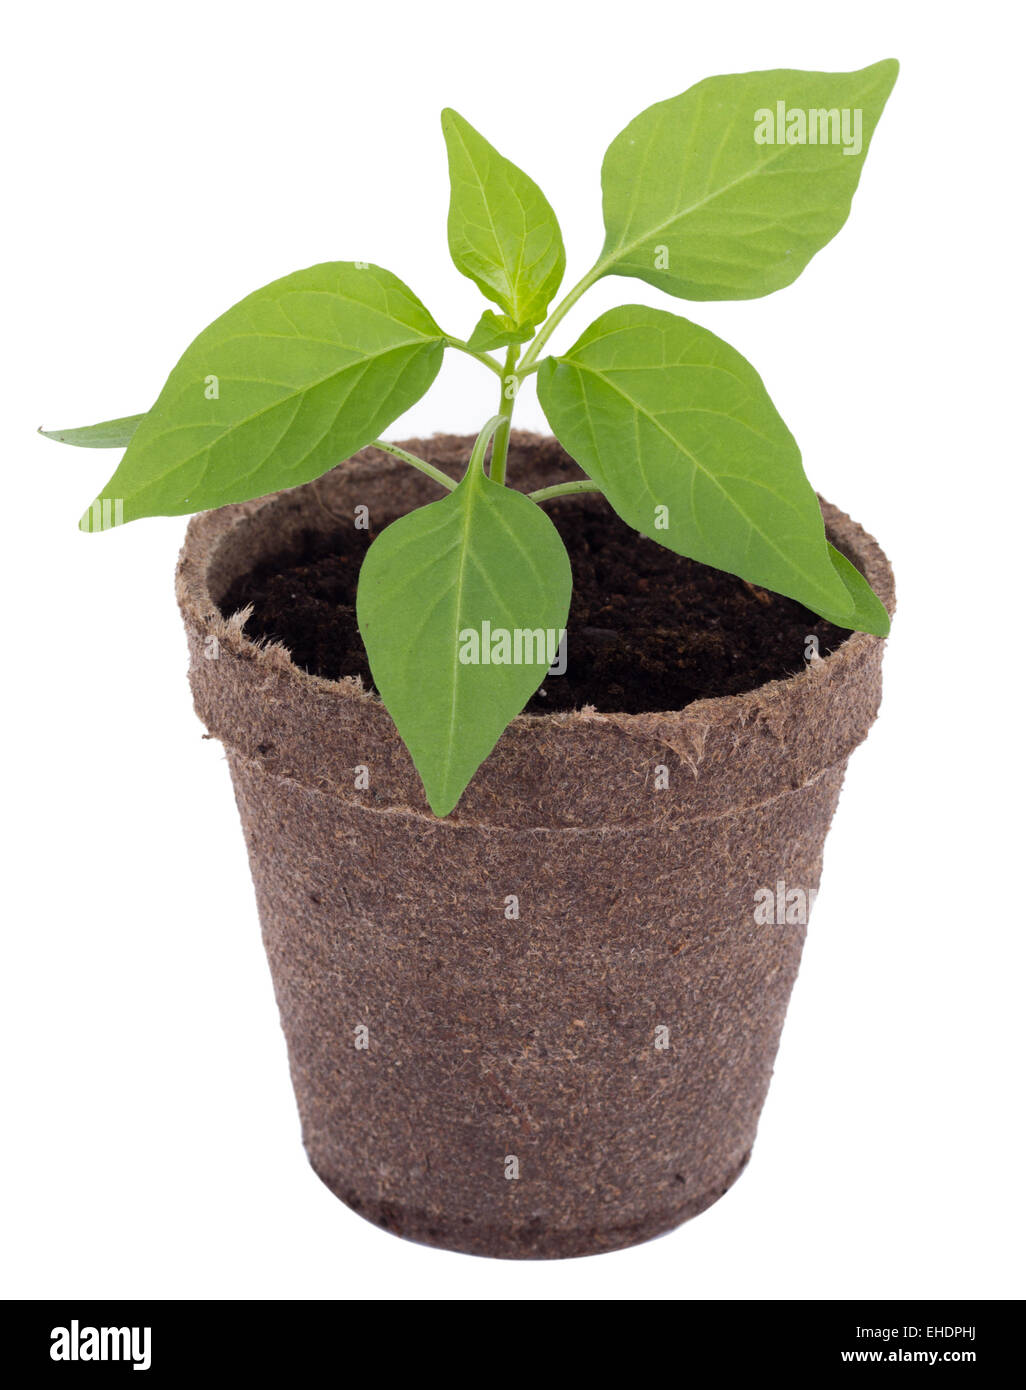 young hot pepper plant Stock Photo